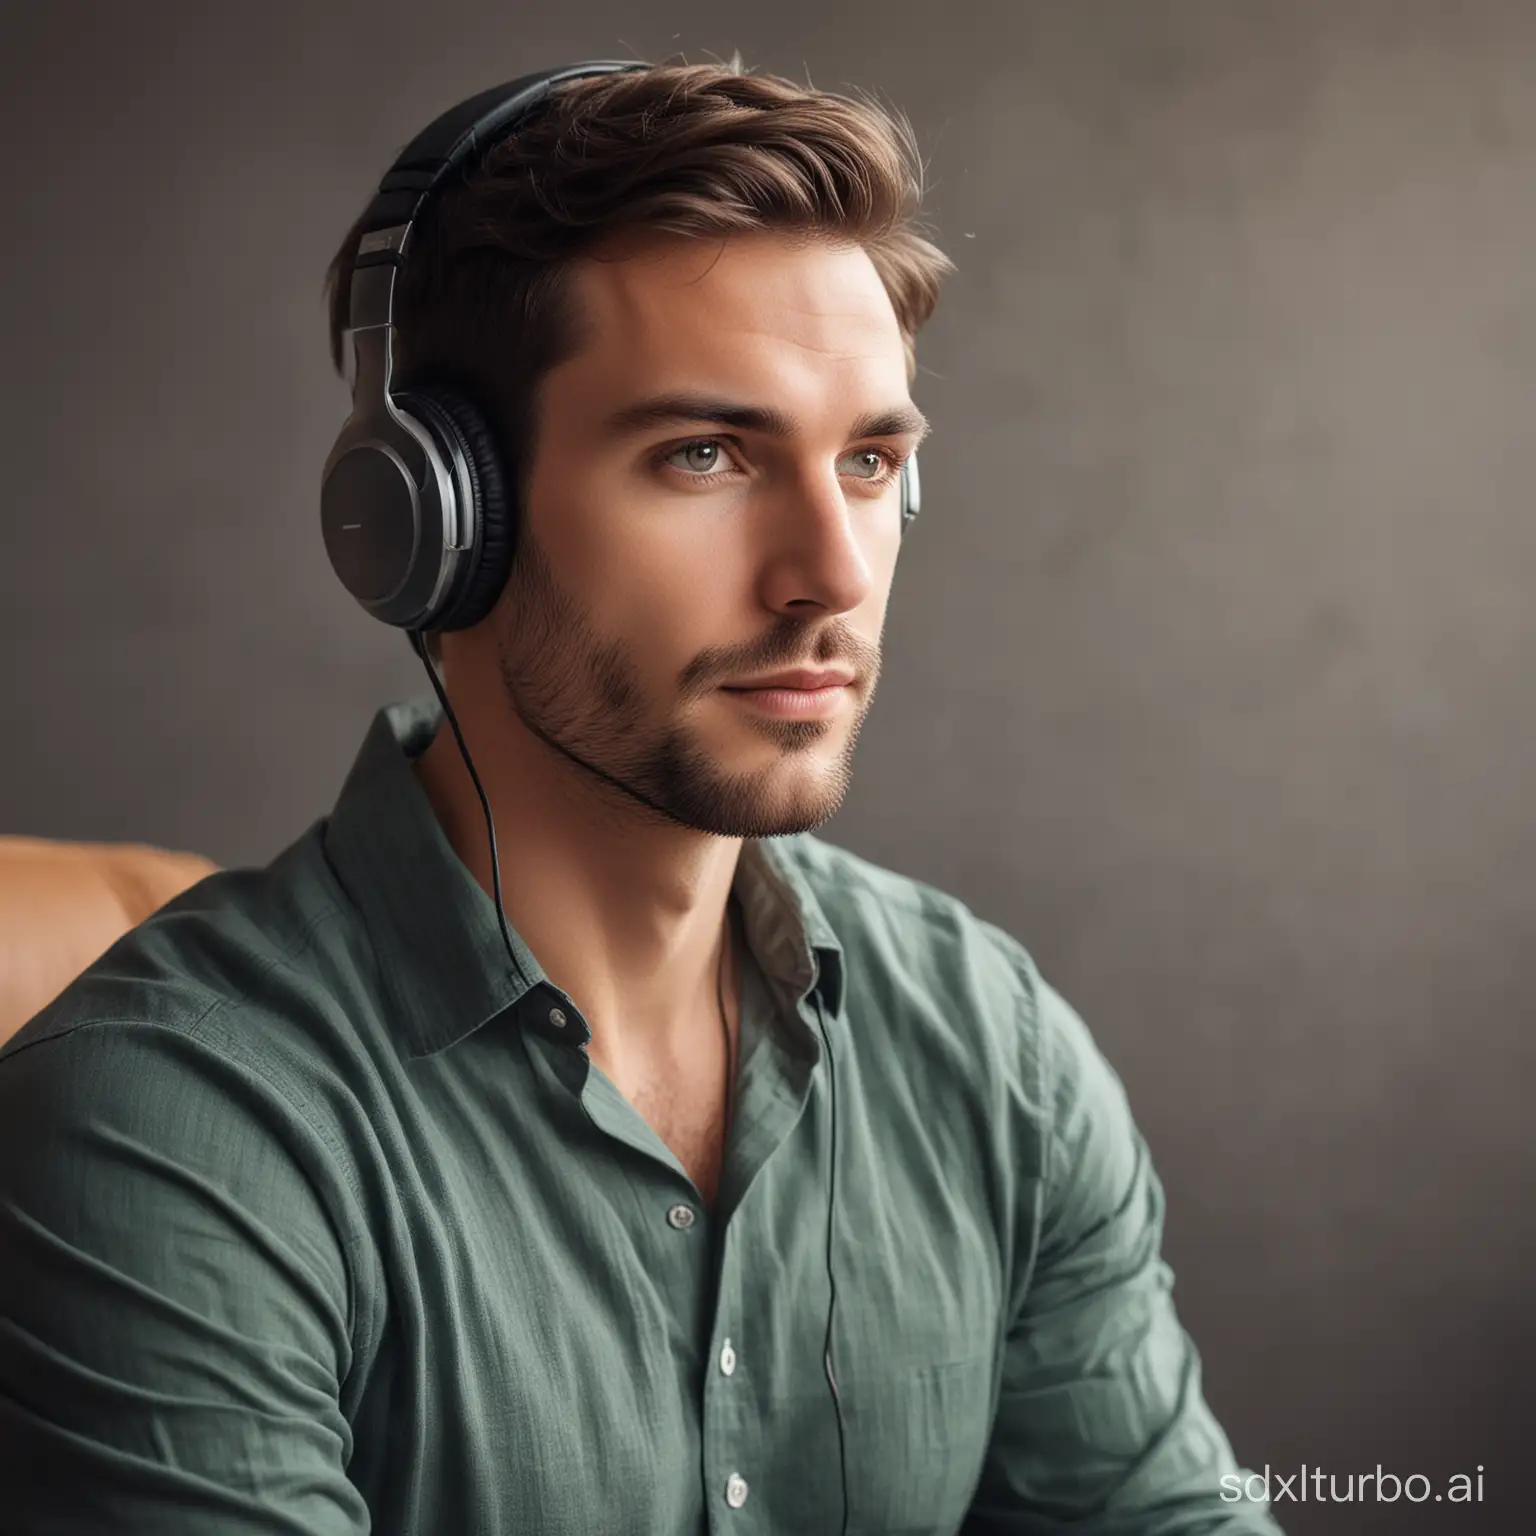 a photo of a man listening to audio affirmation statements, looking serene and confident